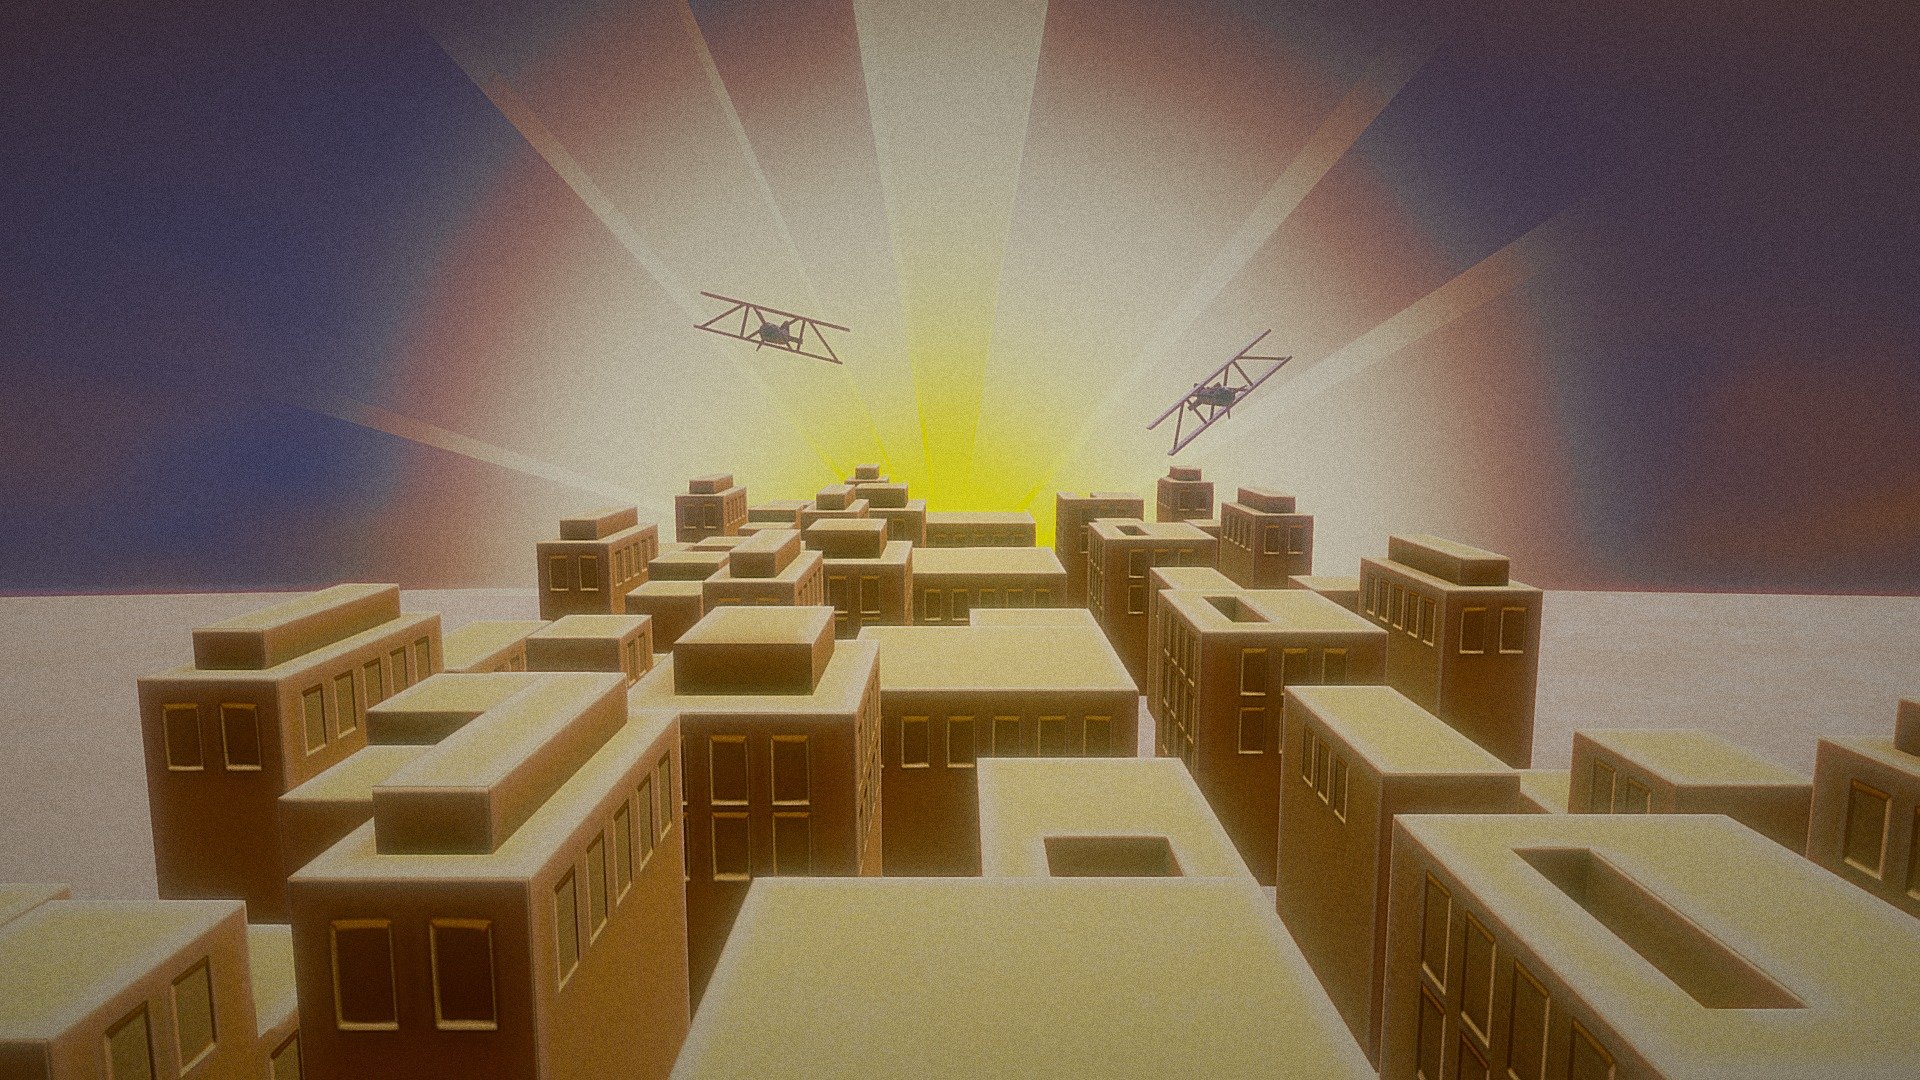 I have been wanting to do this for a while because I always thought it was facinating how much this painting already looked like a lowpoly 3d scene! I've also always been a fan of the aesthetic of the Futurist movement.

I finally sat down to do this because I realized that this would be perfect for this month's lowpoly challenge, seeing as Futurism was an art movement that portrayed utopian visions of a high tech future. So with that in mind, this is my second entry to the UtopiaLPChallenge, this one being in the pastel color scheme rather then the neon one like my first submission. I would have used a longer chain of buildings to be more faithful to the original work, but wanted to ensure that I remained within the 2000 triangle limit (final count for scene is 1964 tris) of the challenge.

The whole scene was modeled and animated in Blender and textured in Substance Painter. The original painting can be seen here:  - Animated Painting: 'Volo Urbano' by Tullio Crali - 3D model by SkyeShark 3d model